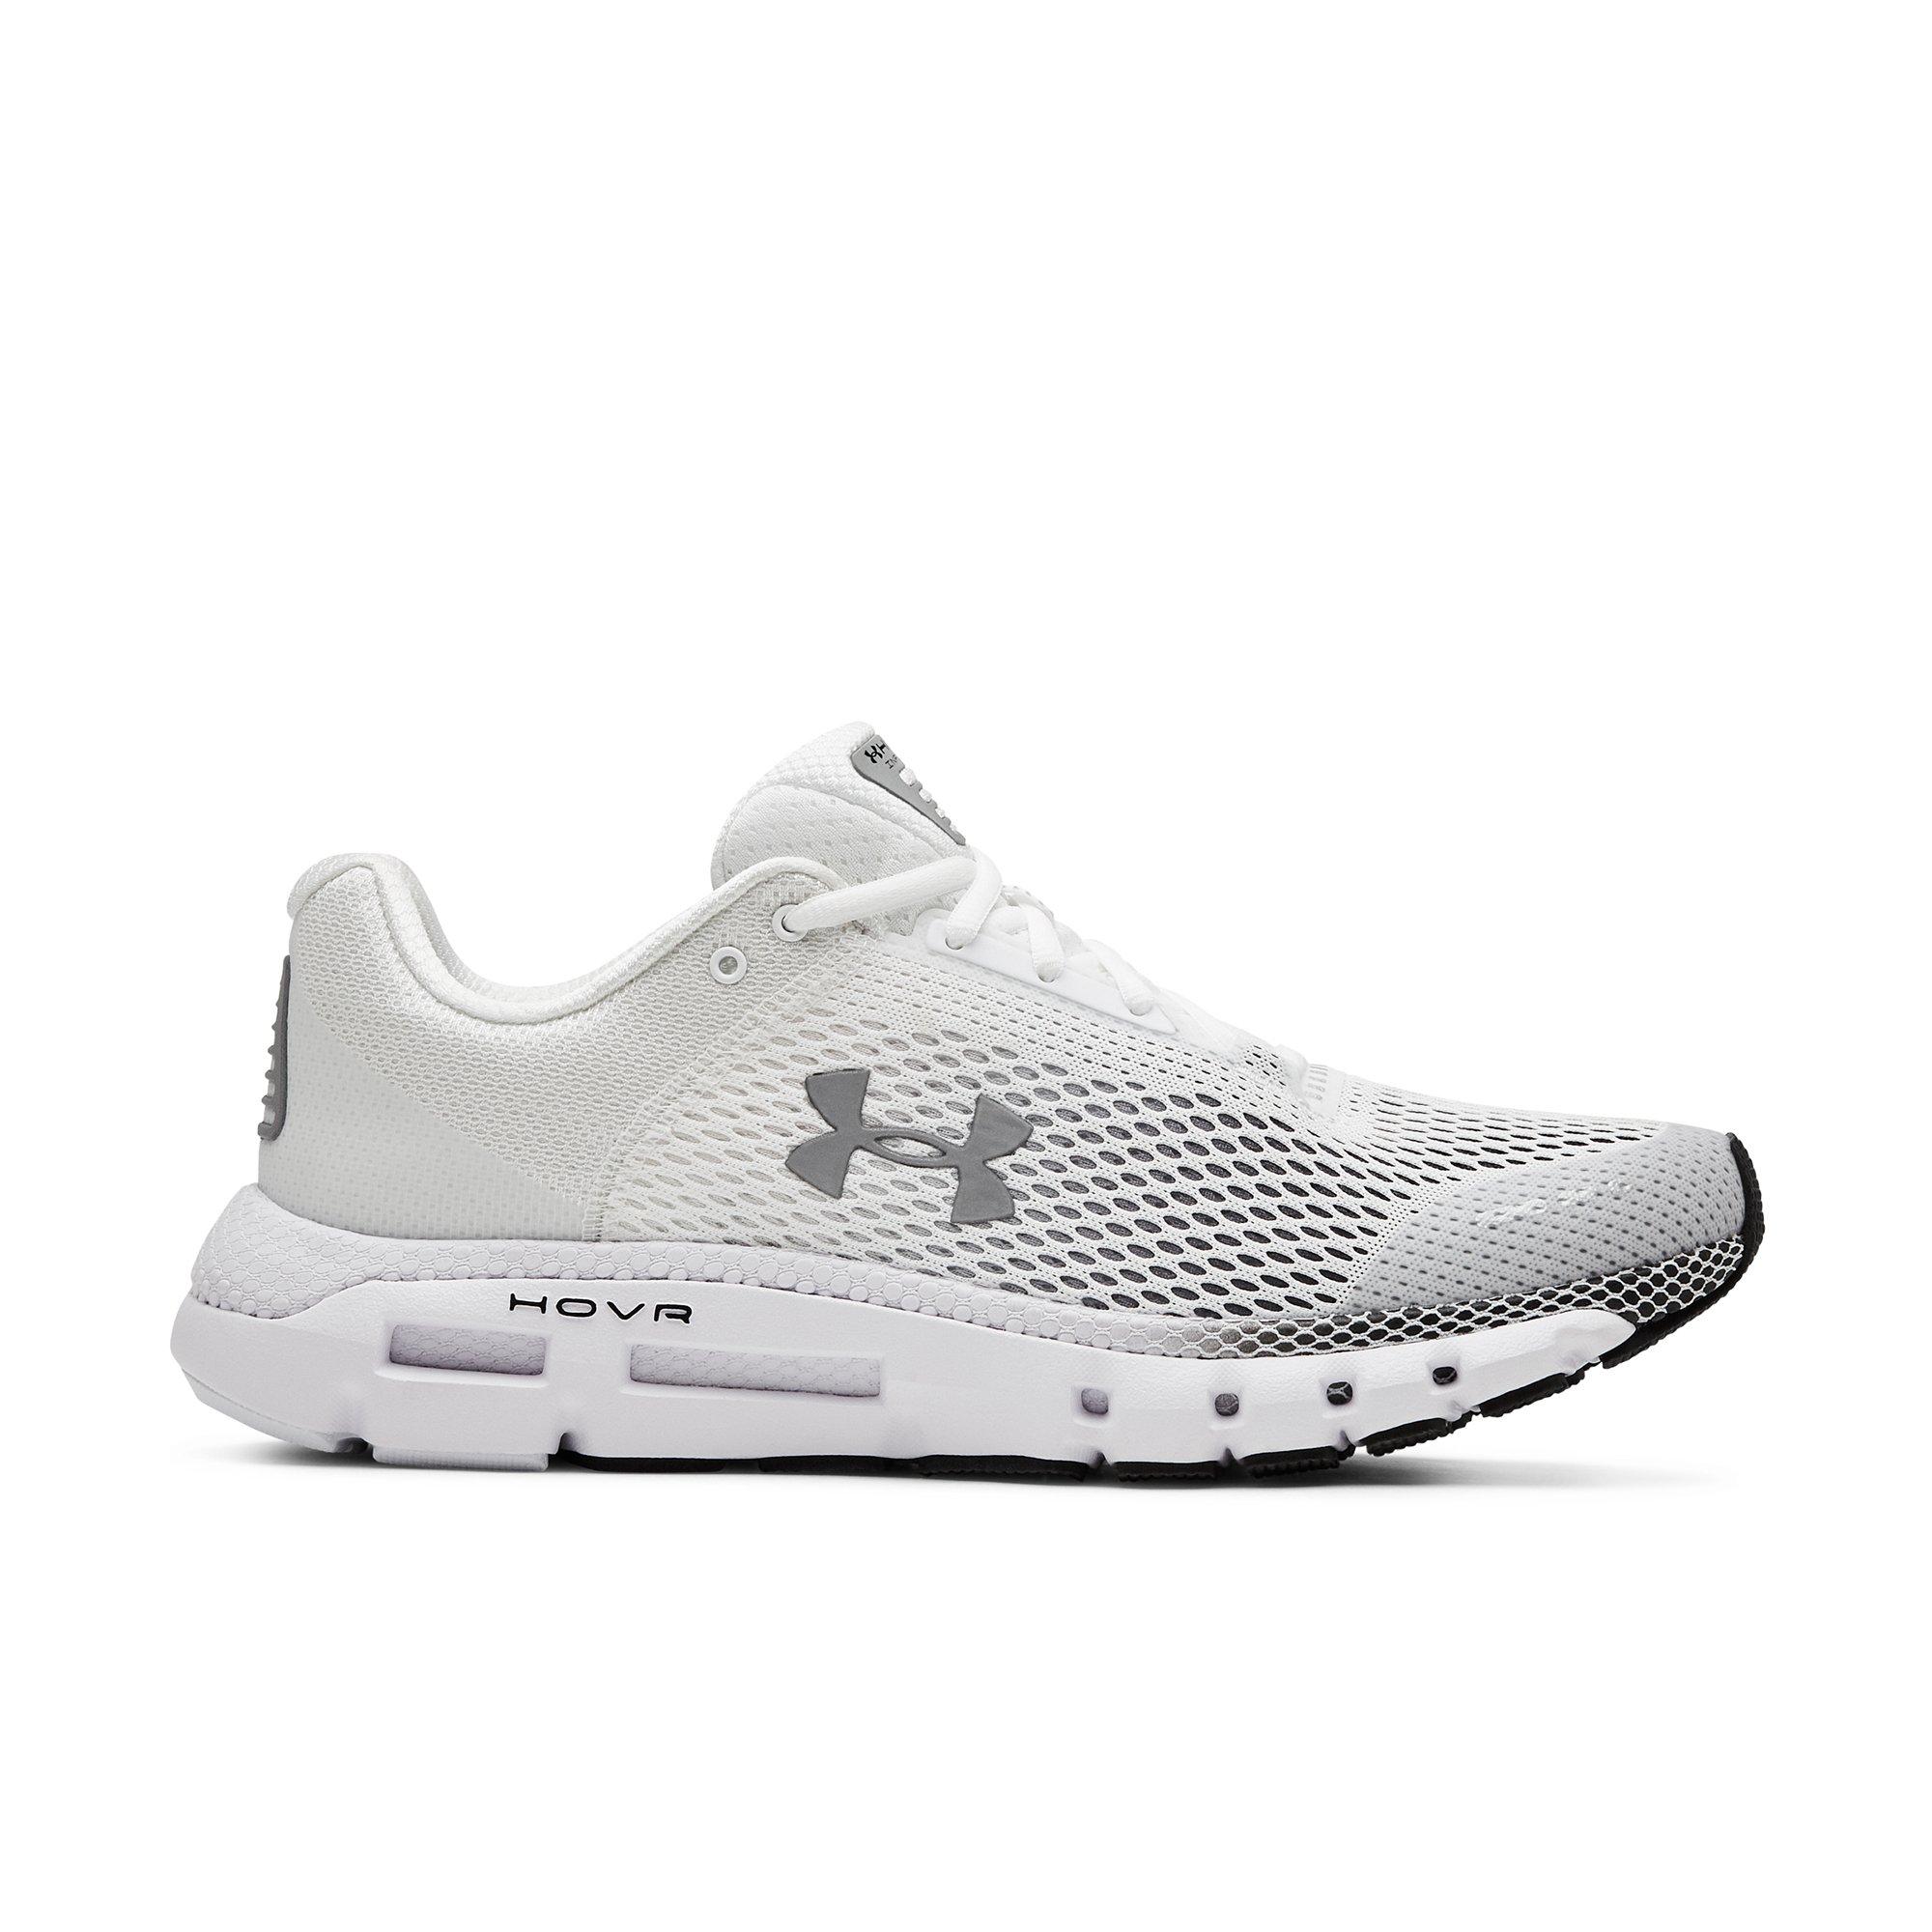 mens under armour white shoes